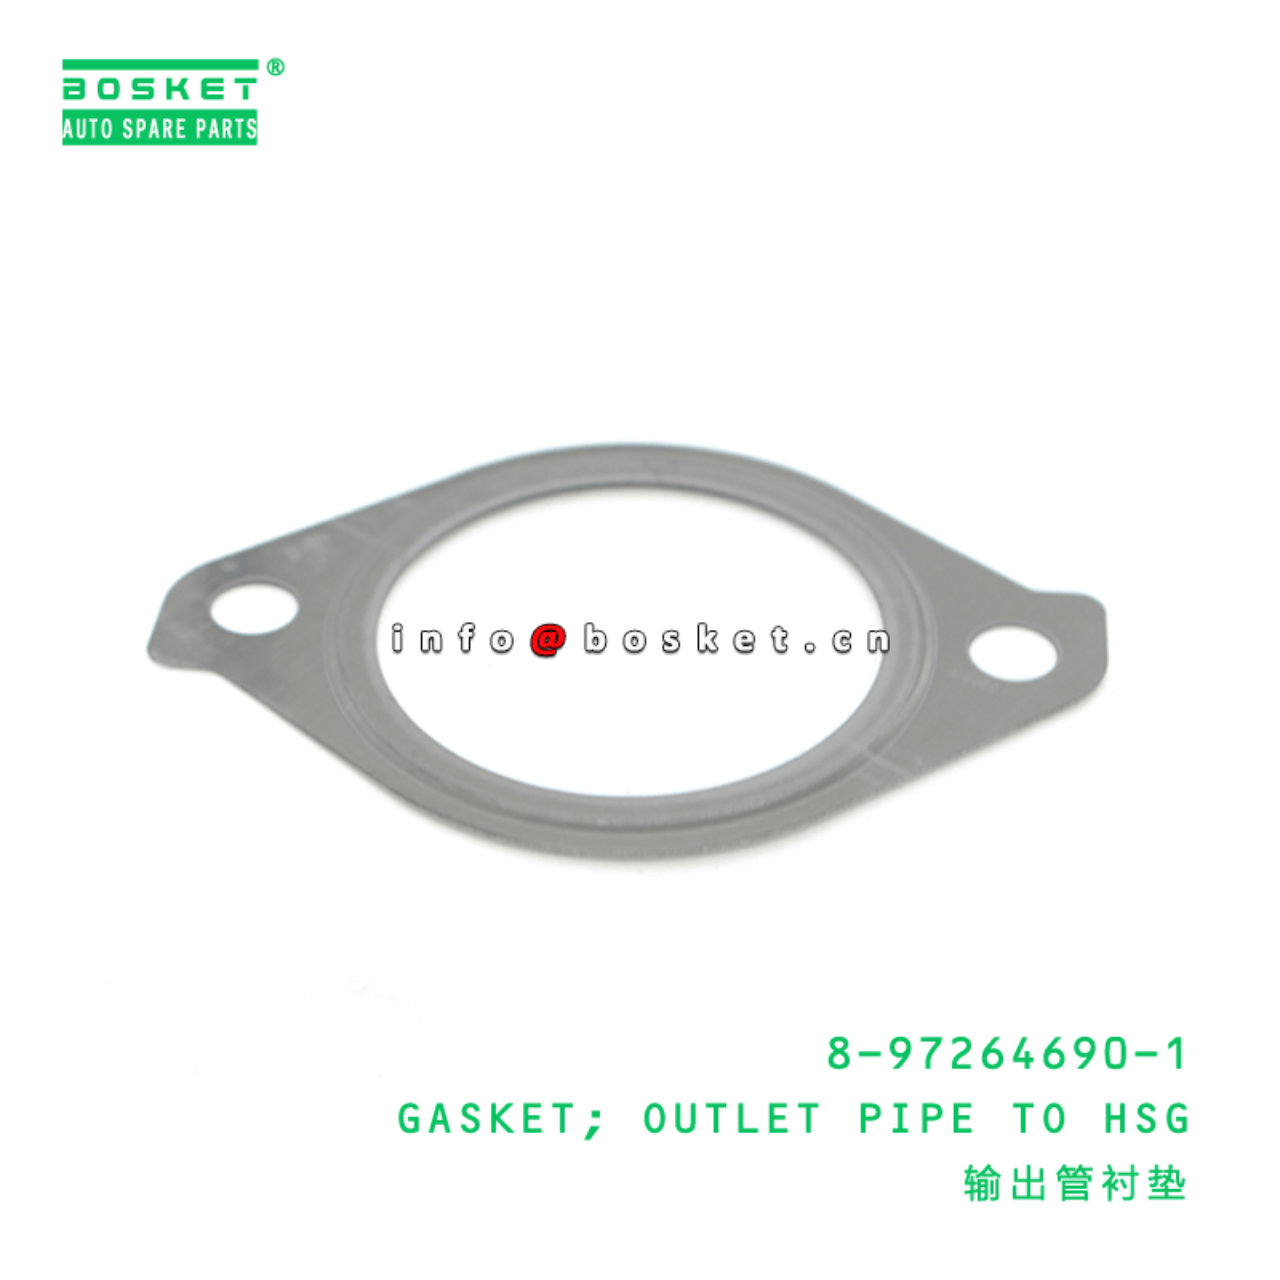 8-97264690-1 Outlet Pipe To Housing Gasket 8972646901 Suitable for ISUZU XD